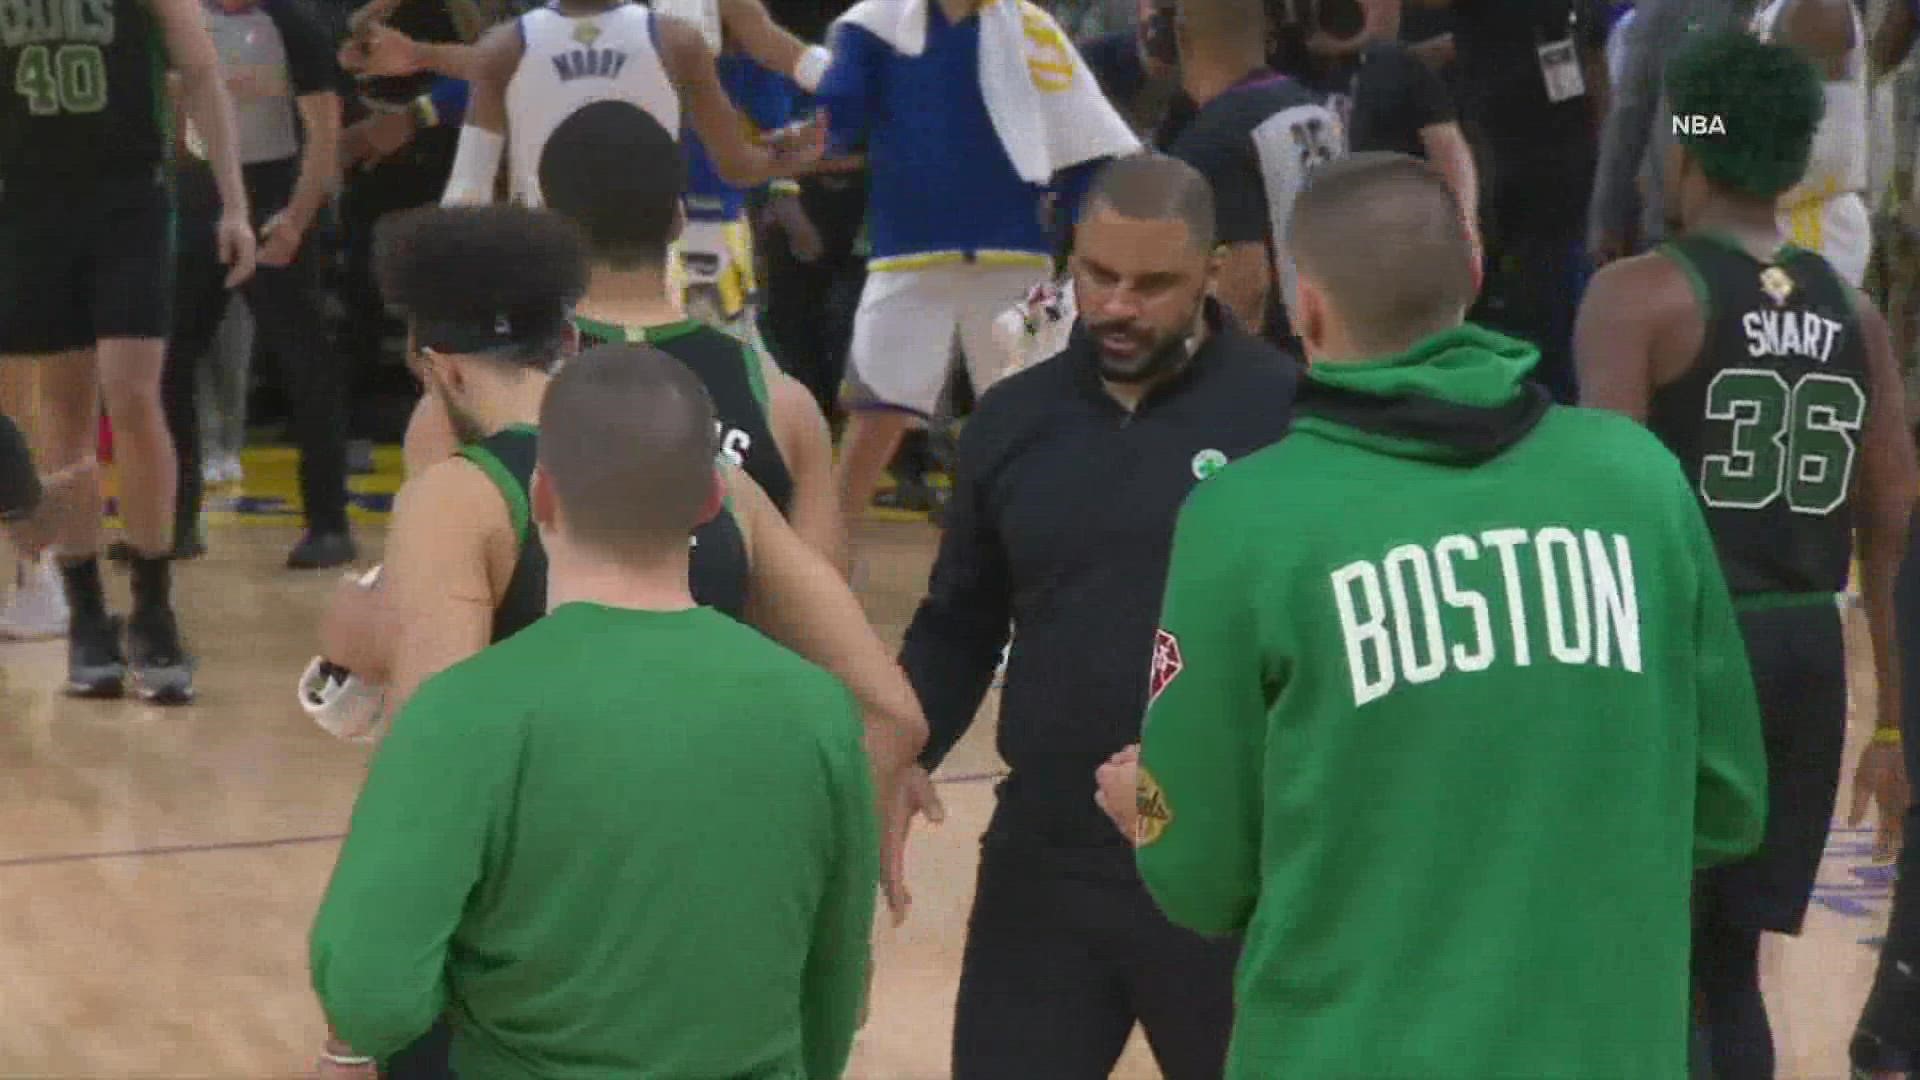 The Celtics said Udoka was suspended for “violations of team policies," which sources said was an improper relationship with a member of the organization.